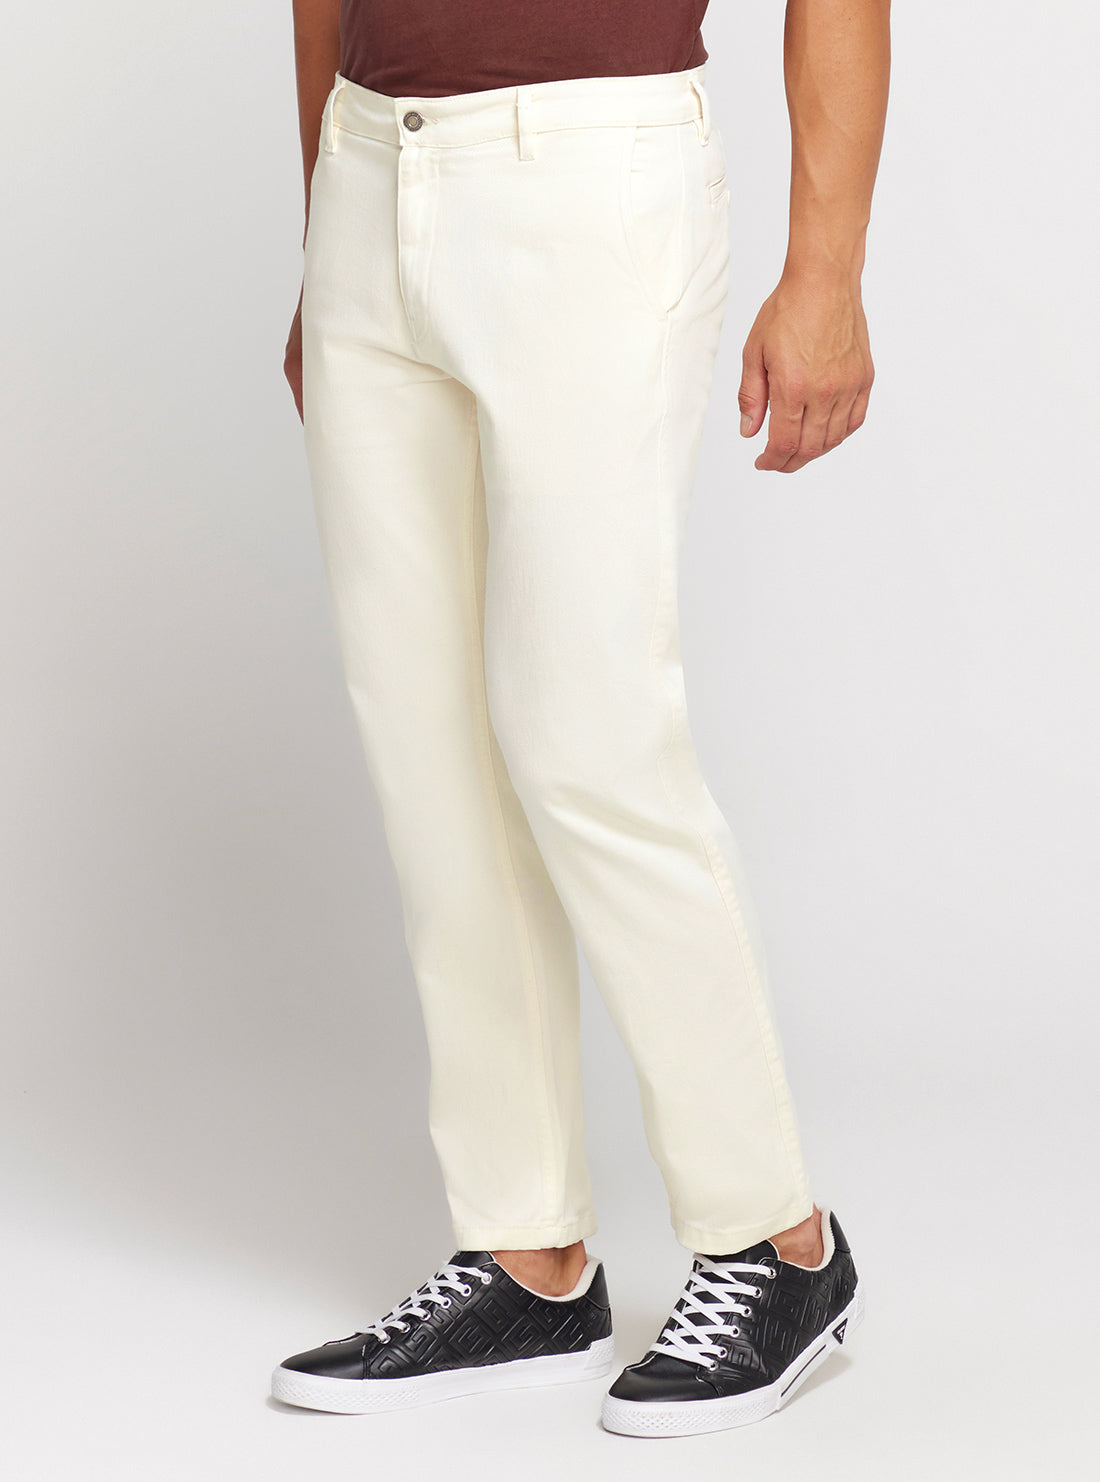 GUESS White Low-Rise Straight-leg Angel Chino Pants side view